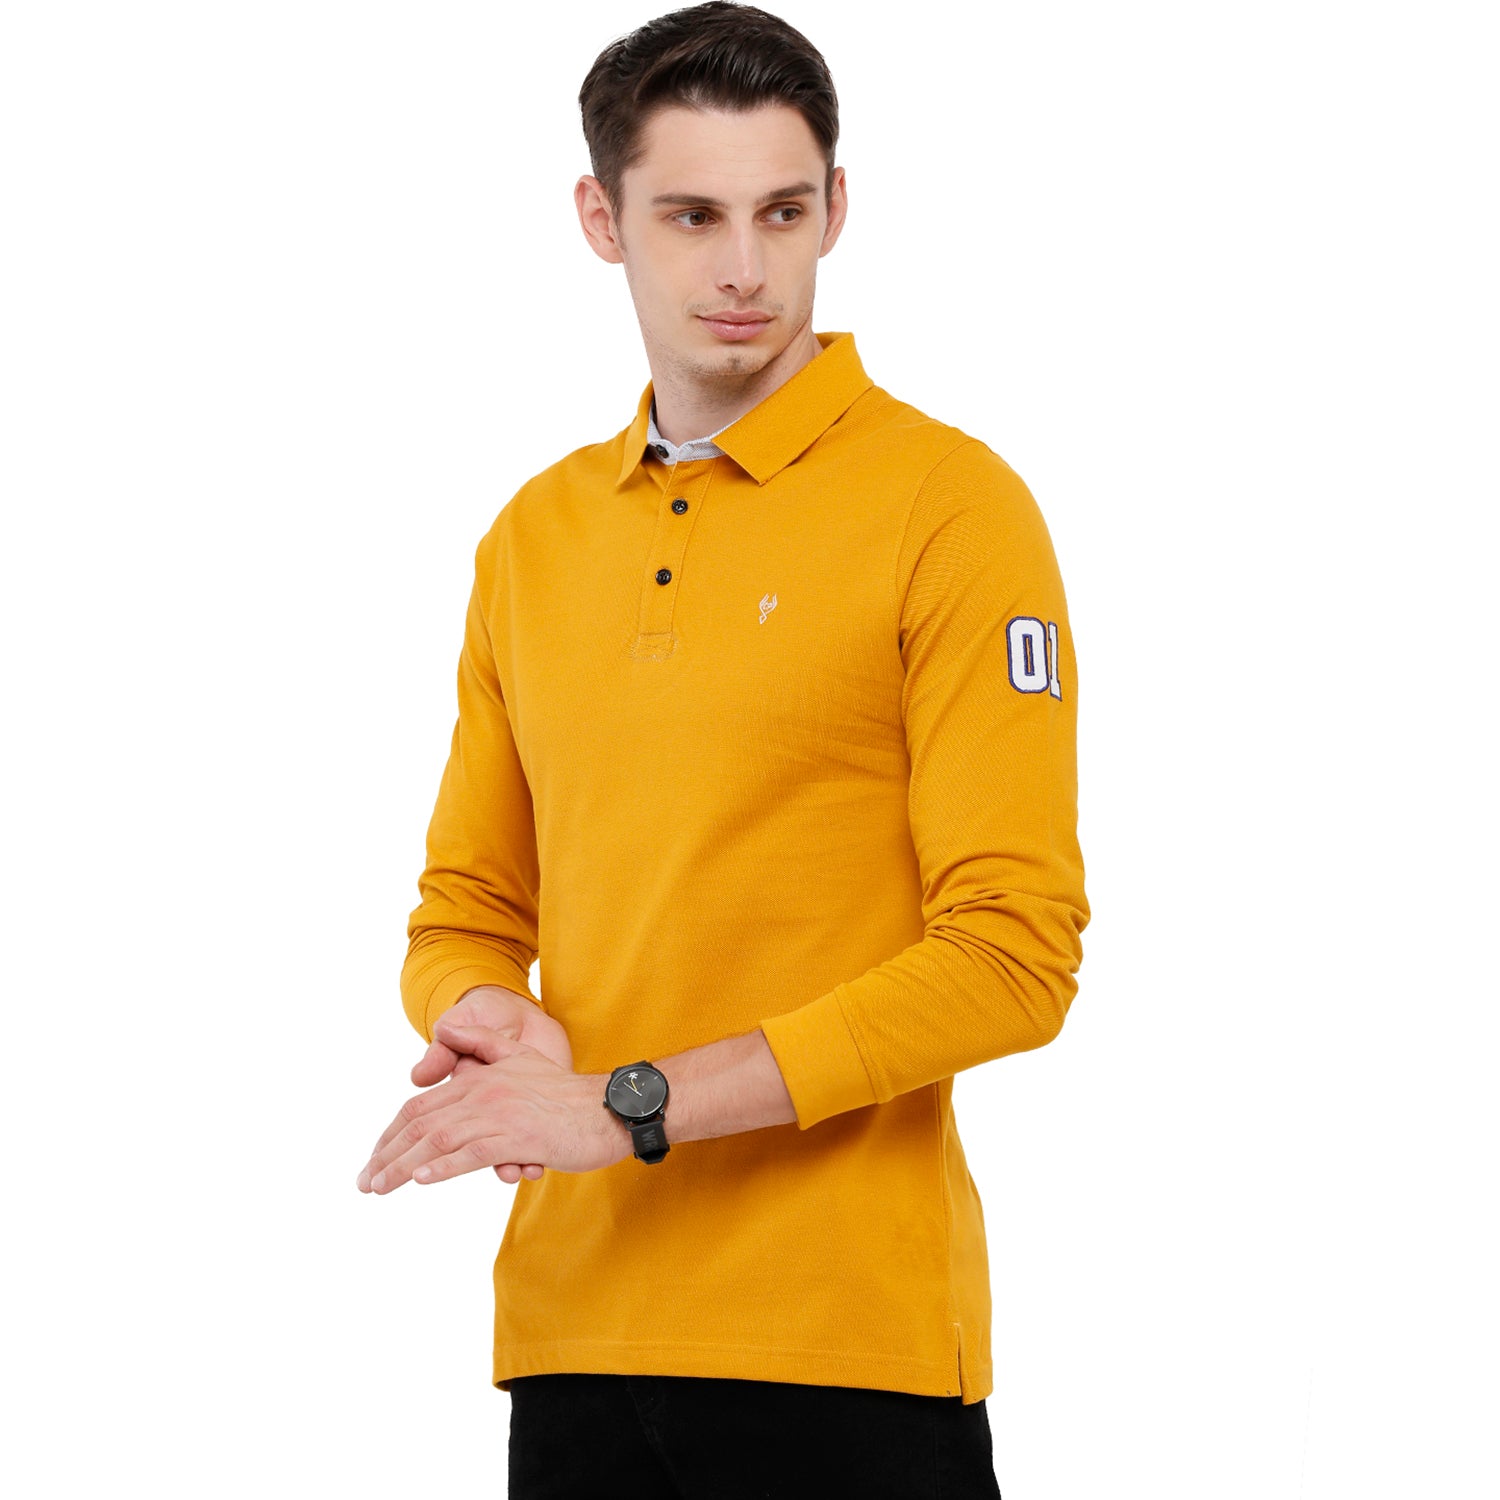 Classic Polo Men's Yellow Solid Polo Full Sleeve Slim Fit T-Shirt - VERNO - 251 B SF P T-shirt Classic Polo 